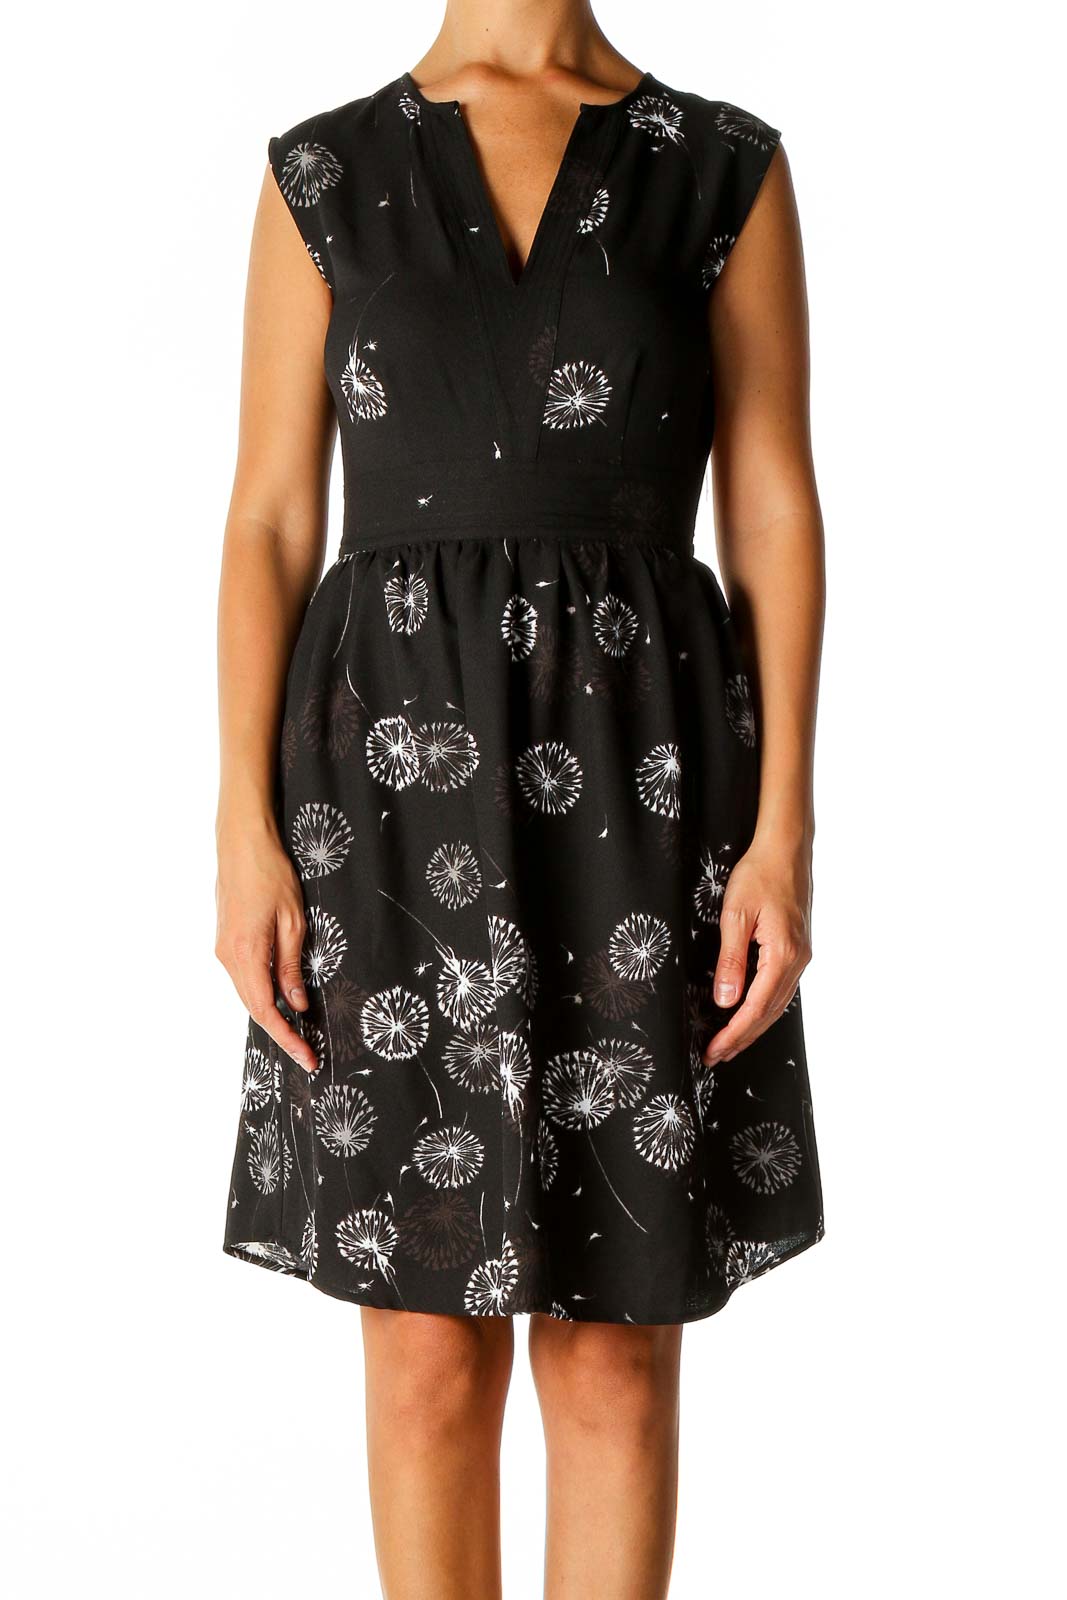 Black Object Print Chic Fit & Flare Dress Front